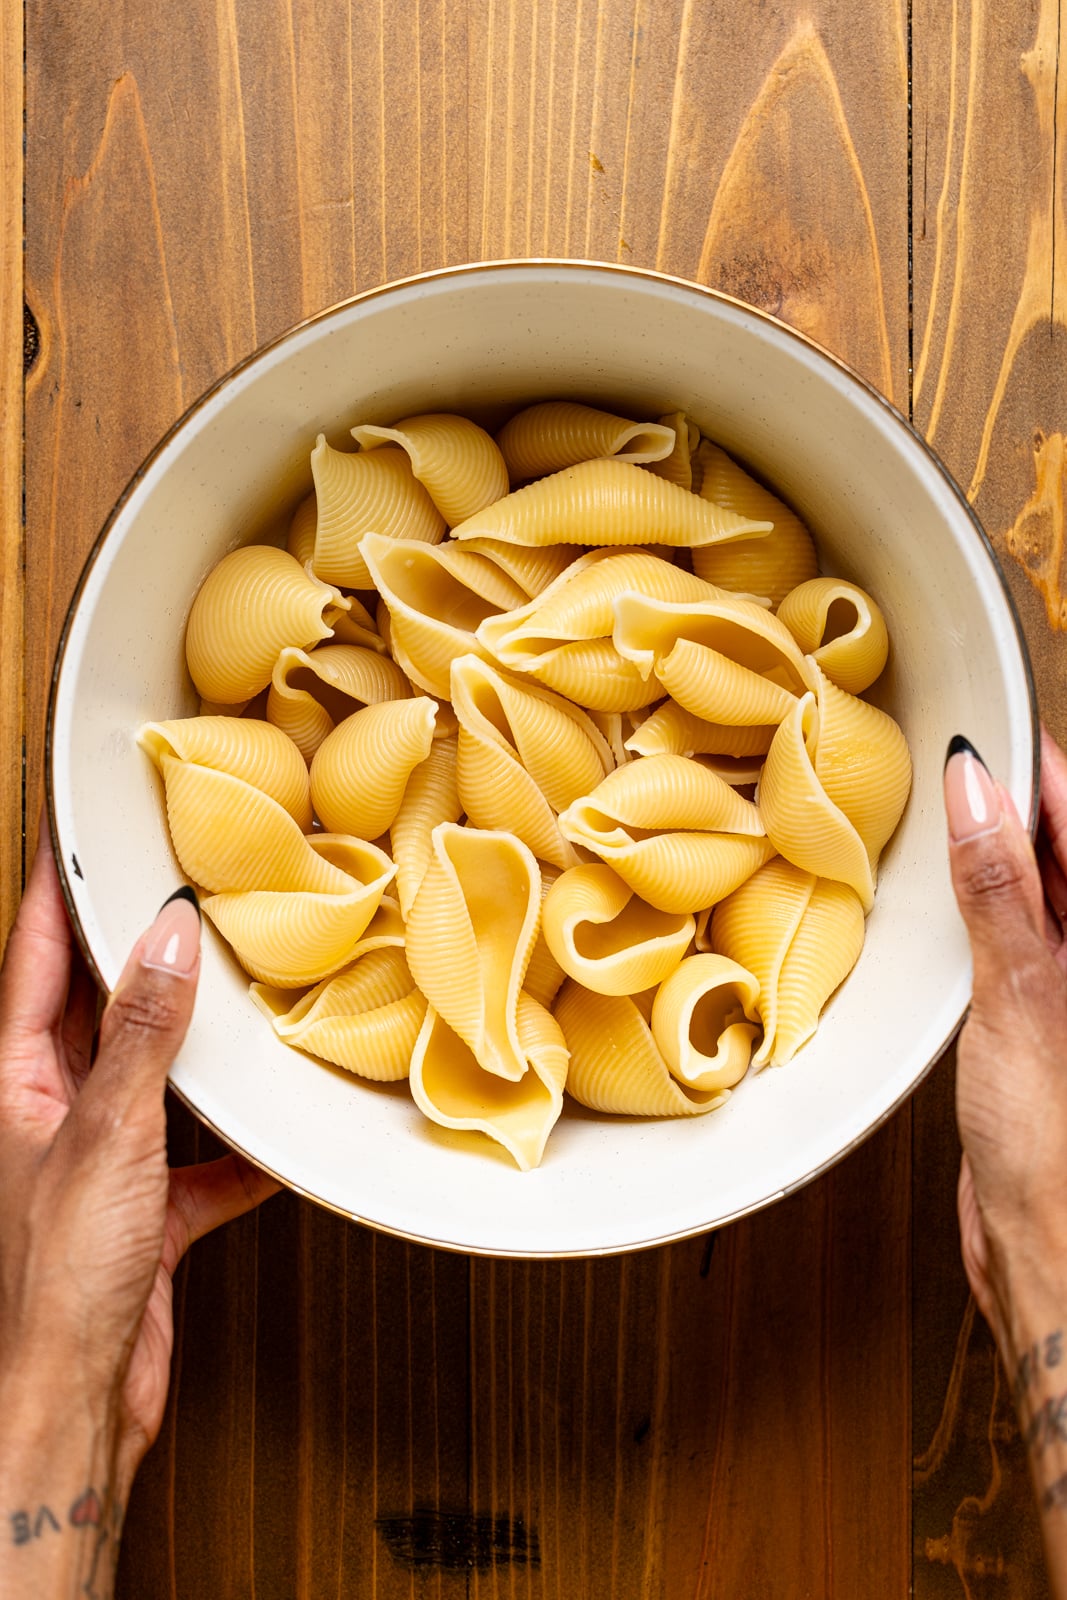 Cooked pasta shells in a white bowl being held.